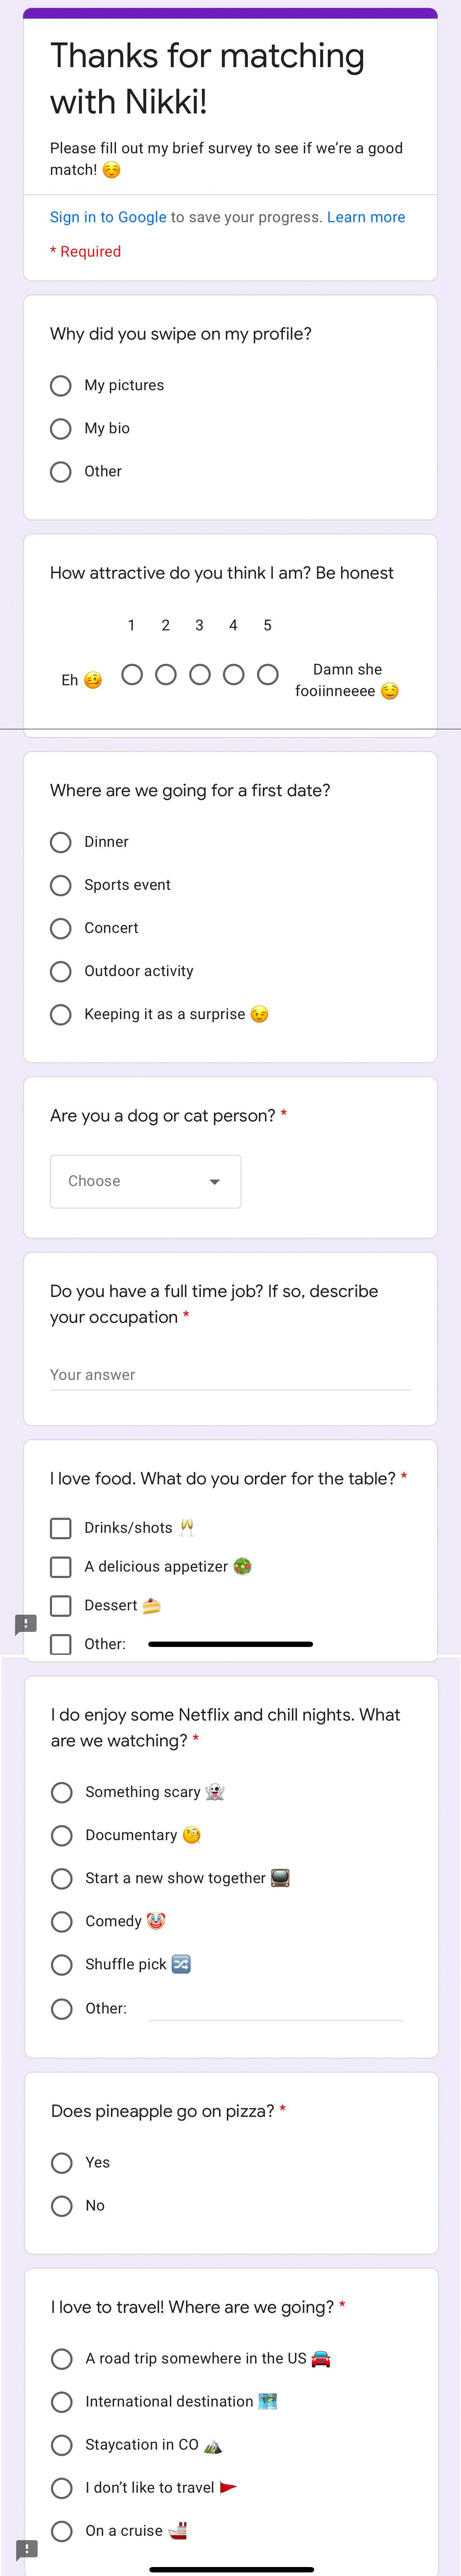 A survey titled &quot;Thanks for matching with Nikki&quot; that then asks several specific questions about where they would go on a date and what the person&#x27;s interests are